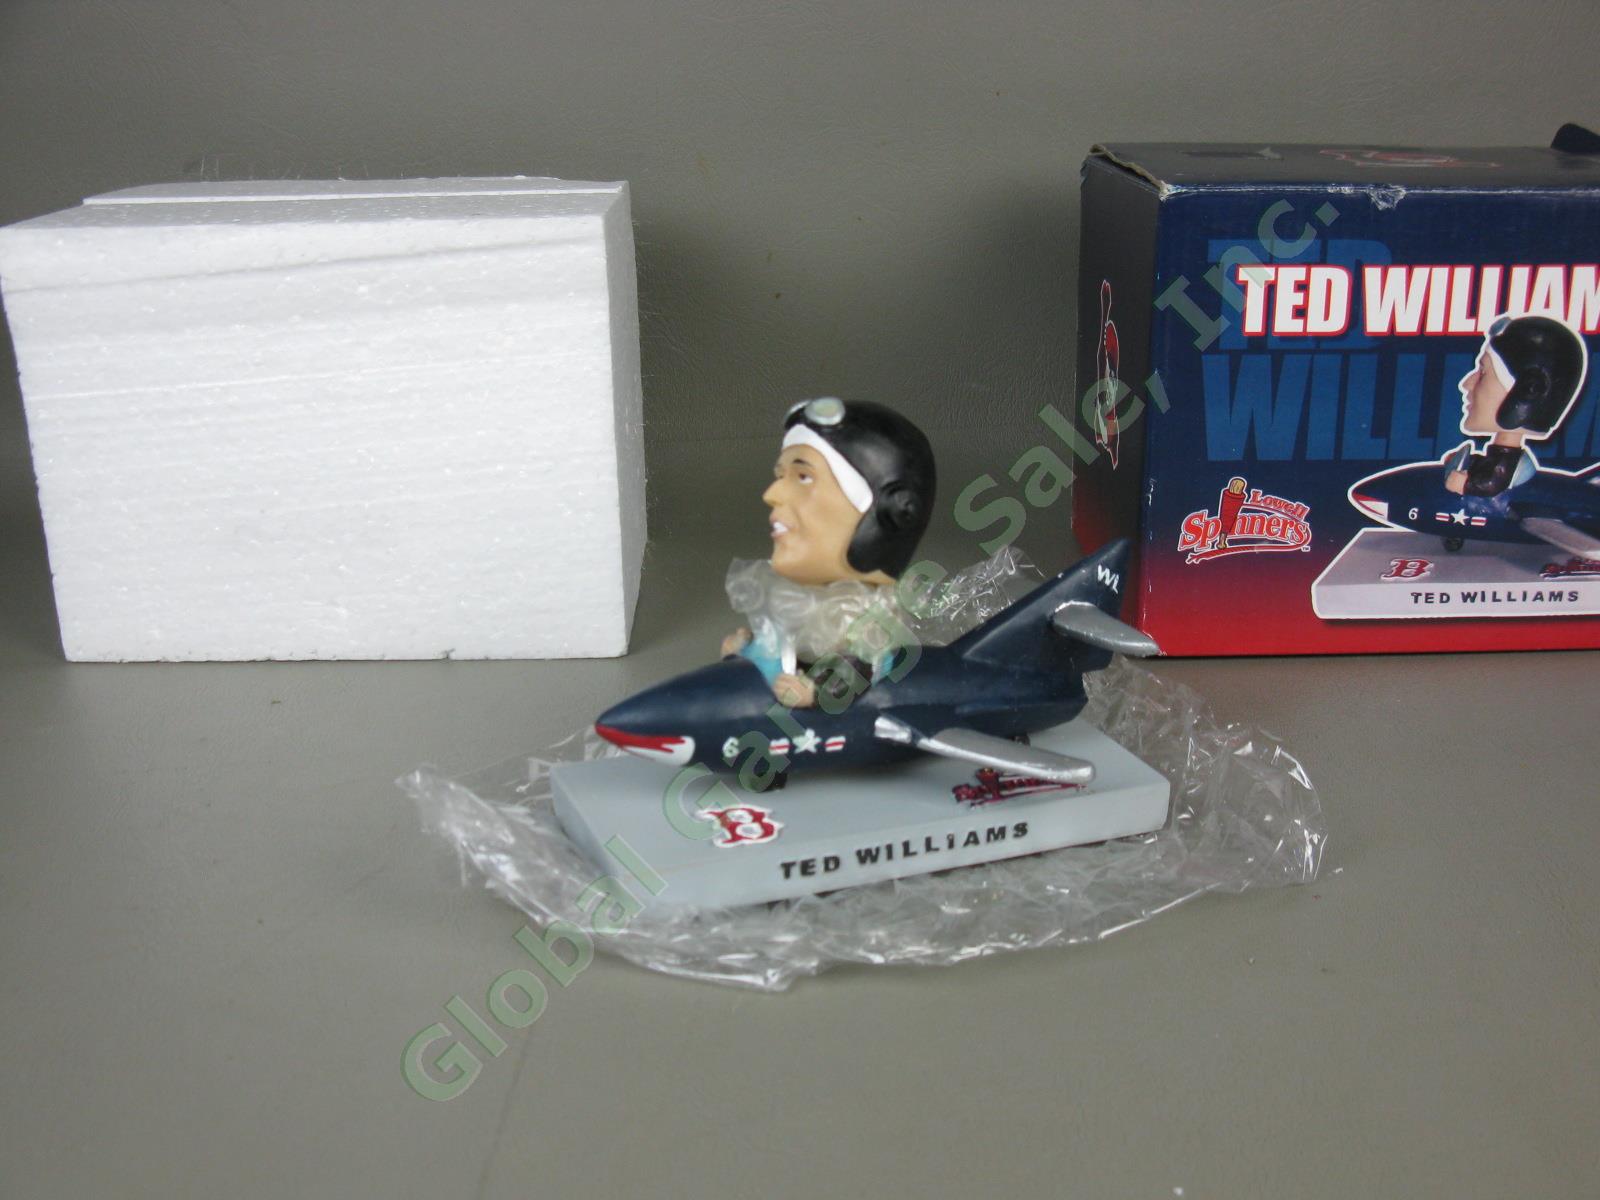 Rare NIB Ted Williams Lowell Spinners Red Sox WWII Jet Pilot Bobblehead 7/1/2008